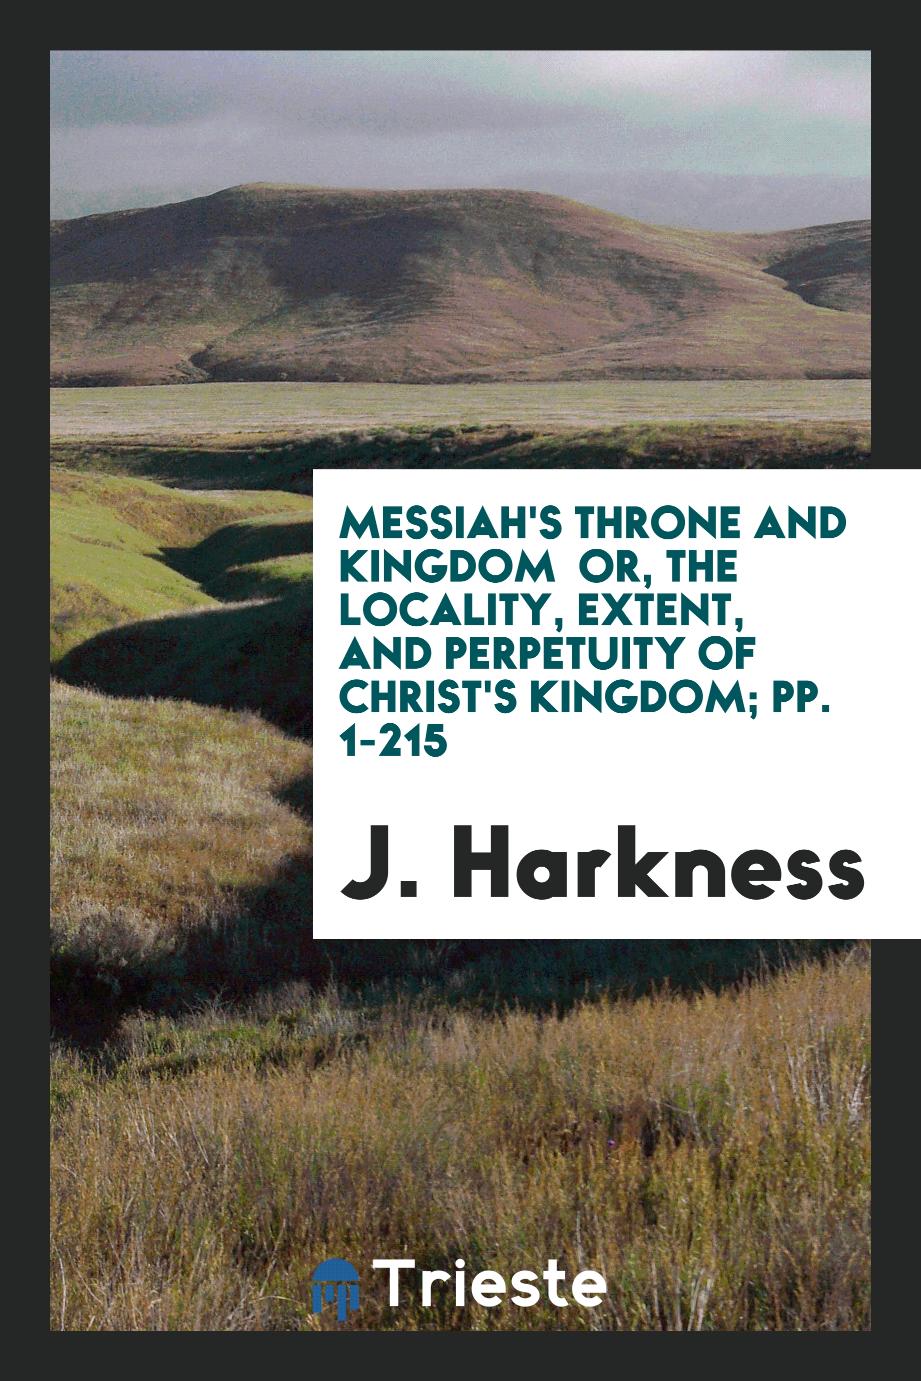 Messiah's Throne and Kingdom or, the Locality, Extent, and Perpetuity of Christ's Kingdom; pp. 1-215